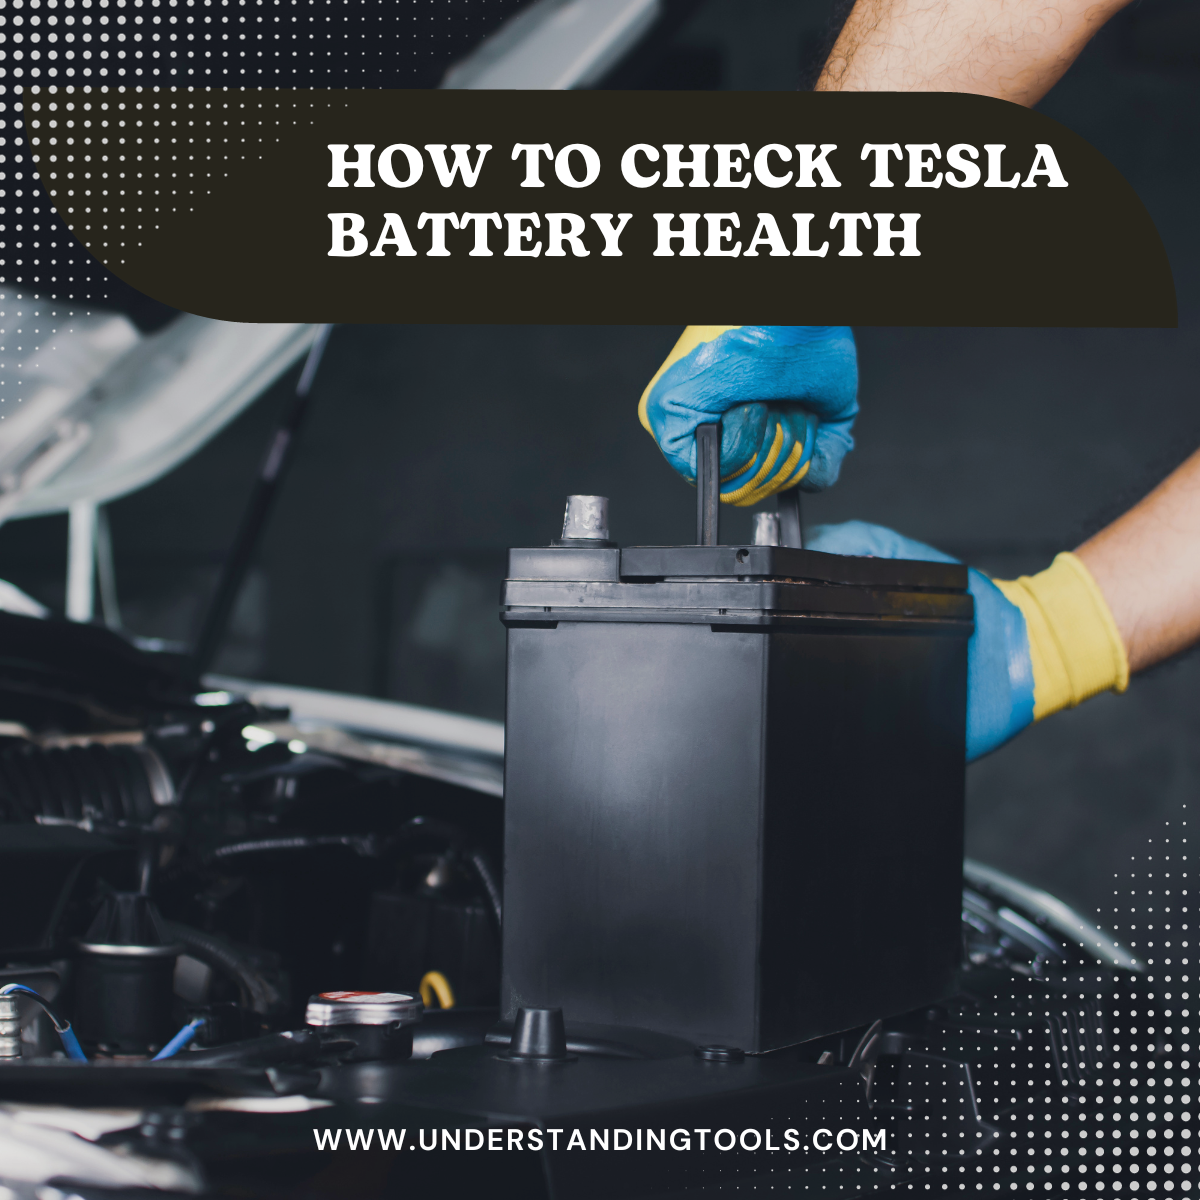 How to Check Tesla Battery Health